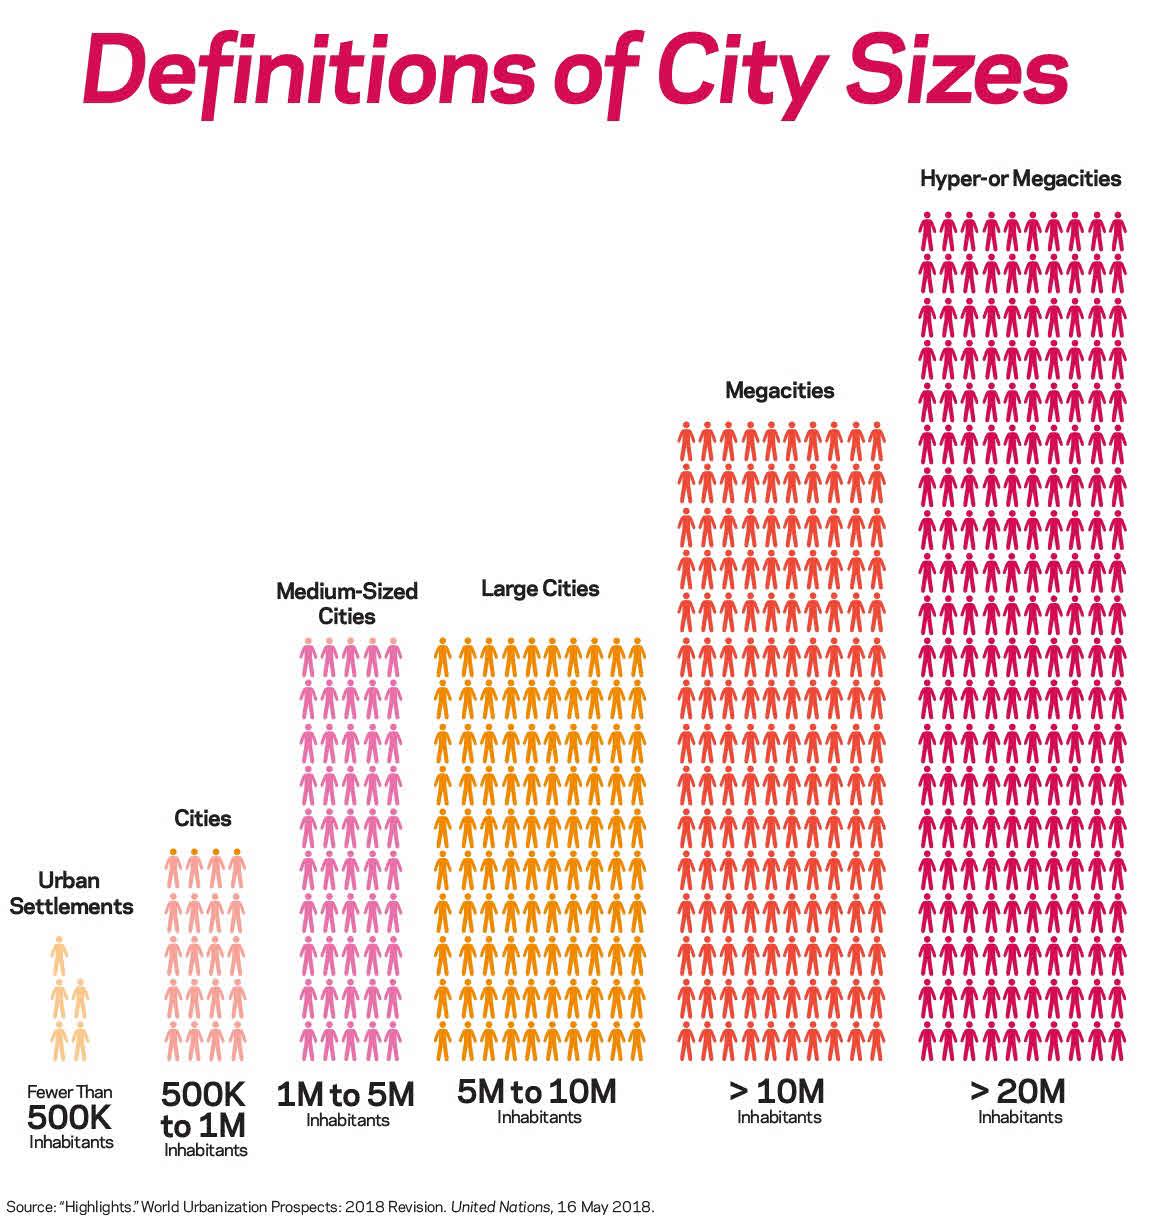 An infographic with the definition of various types of cities and their population sizes.